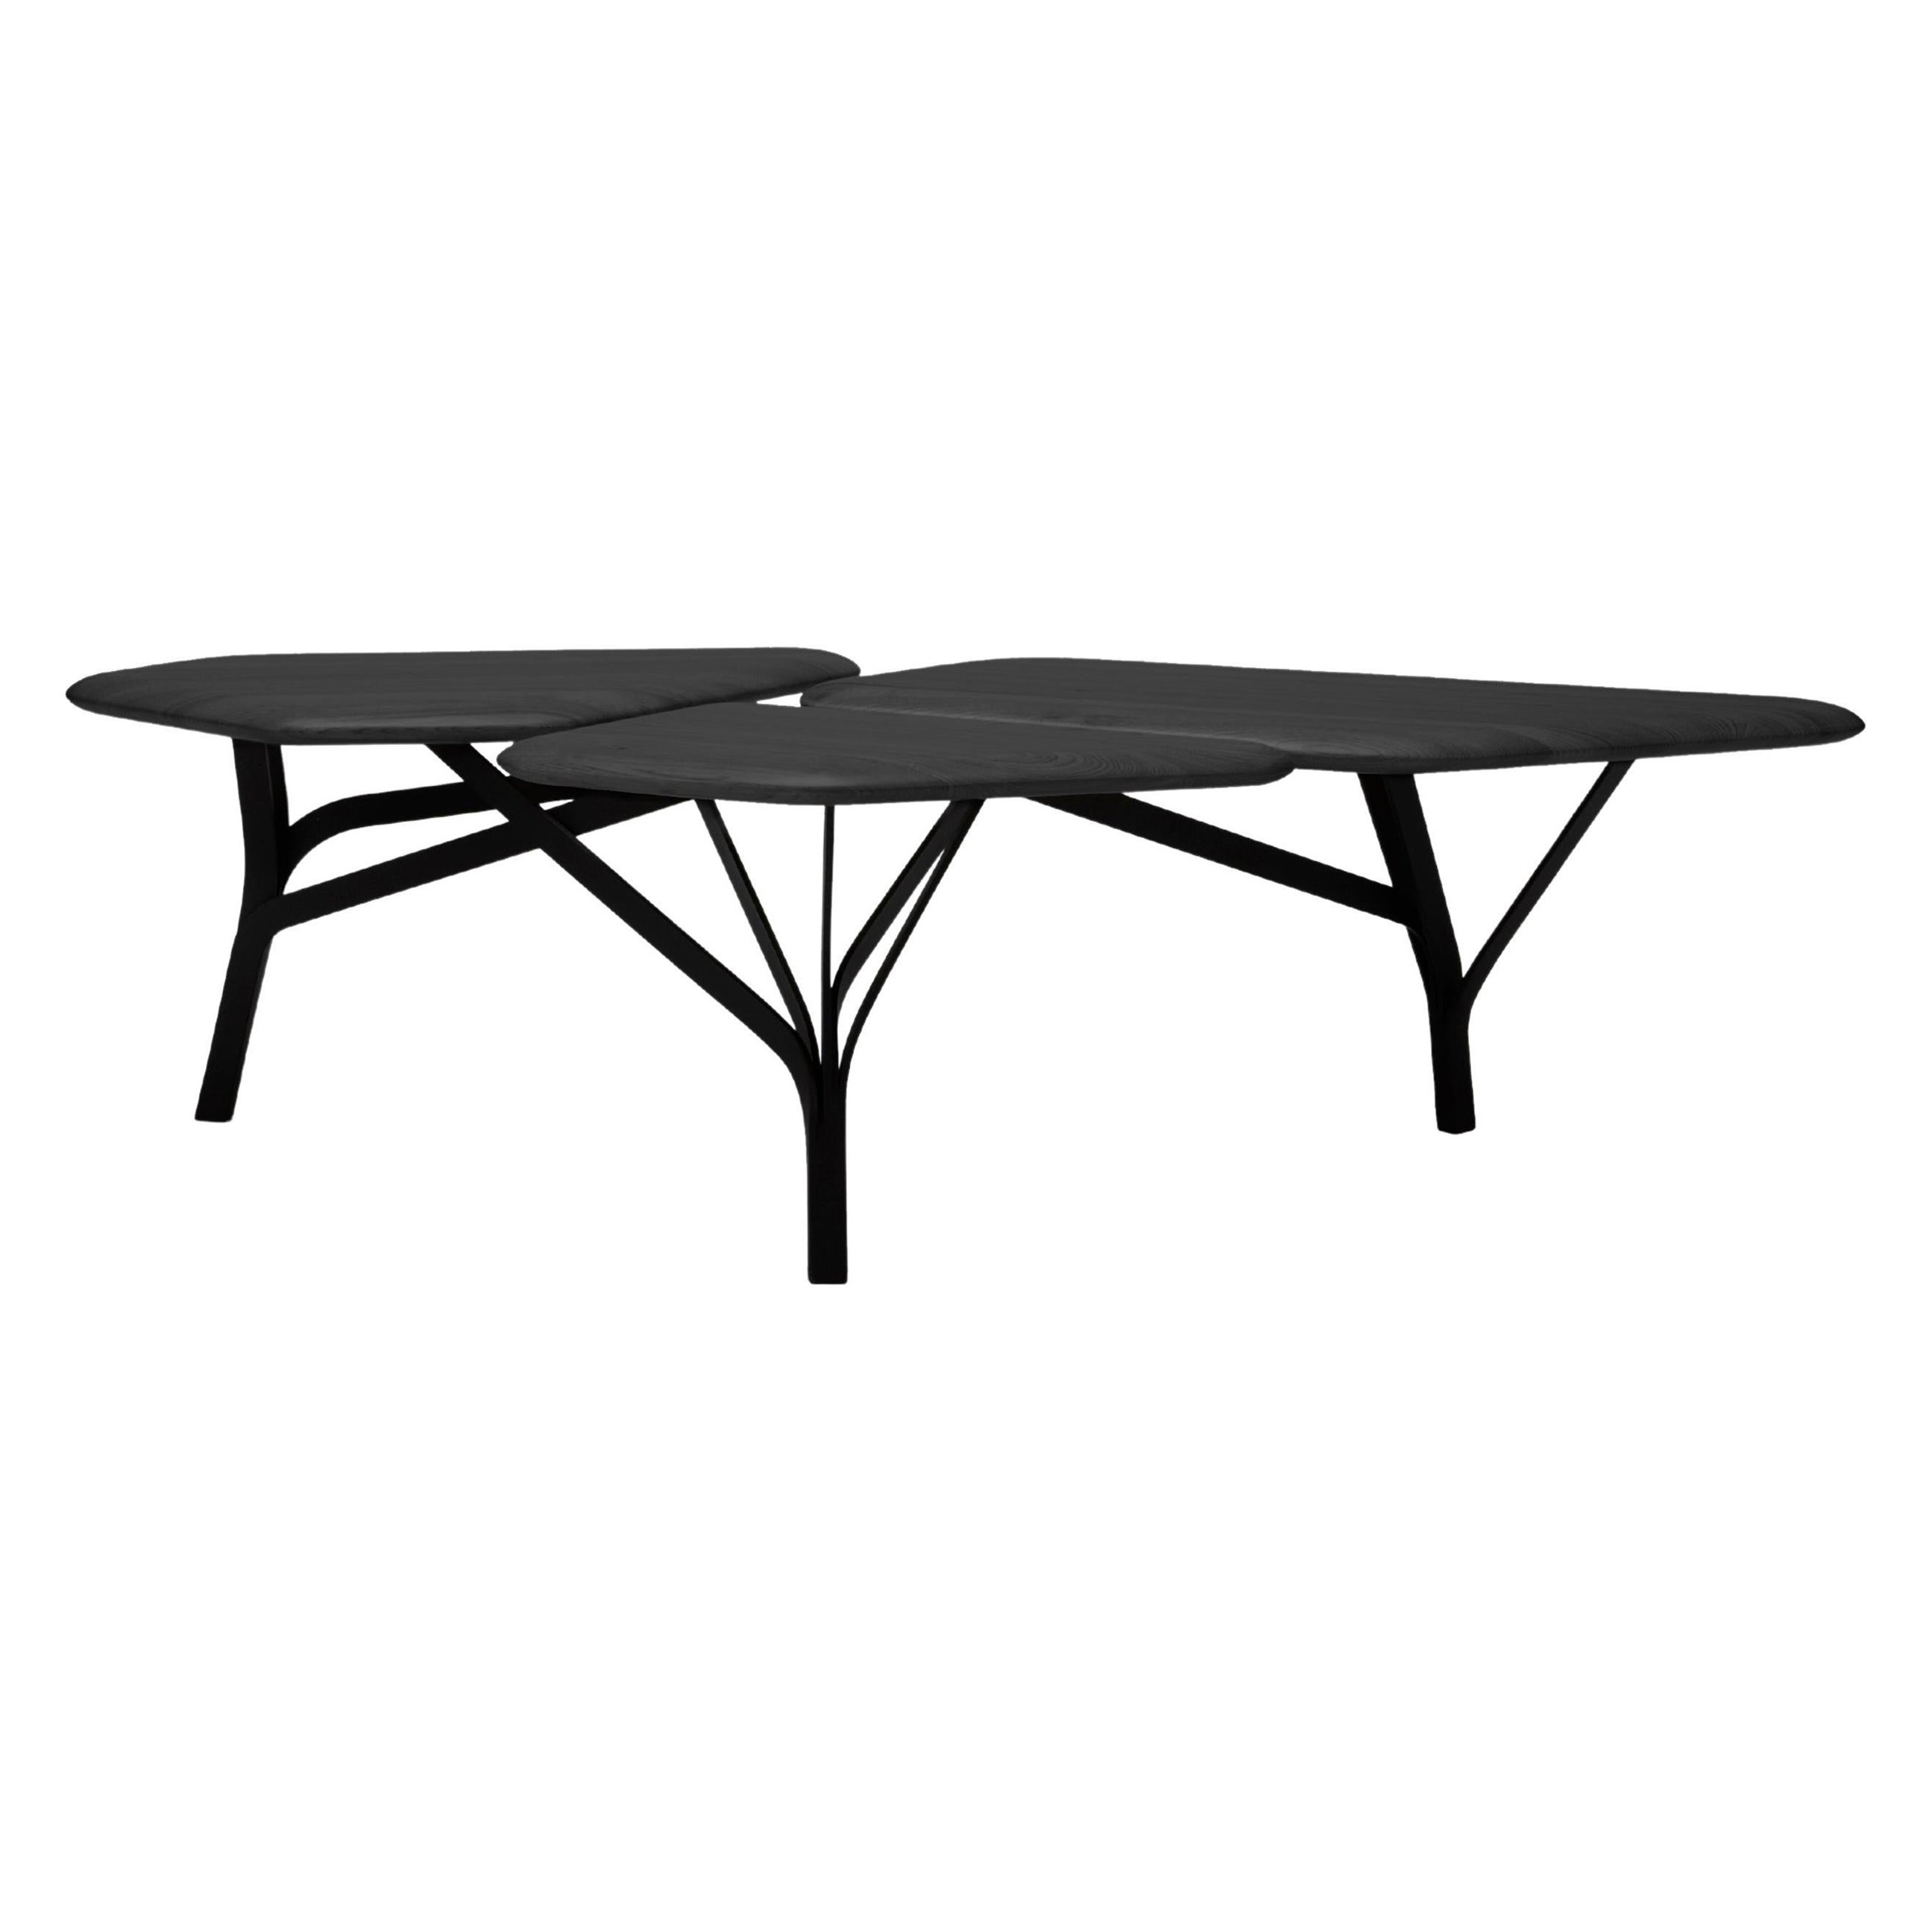 Borghese Coffee Table, Black Wood Top by Noé Duchaufour Lawrance for La Chance For Sale